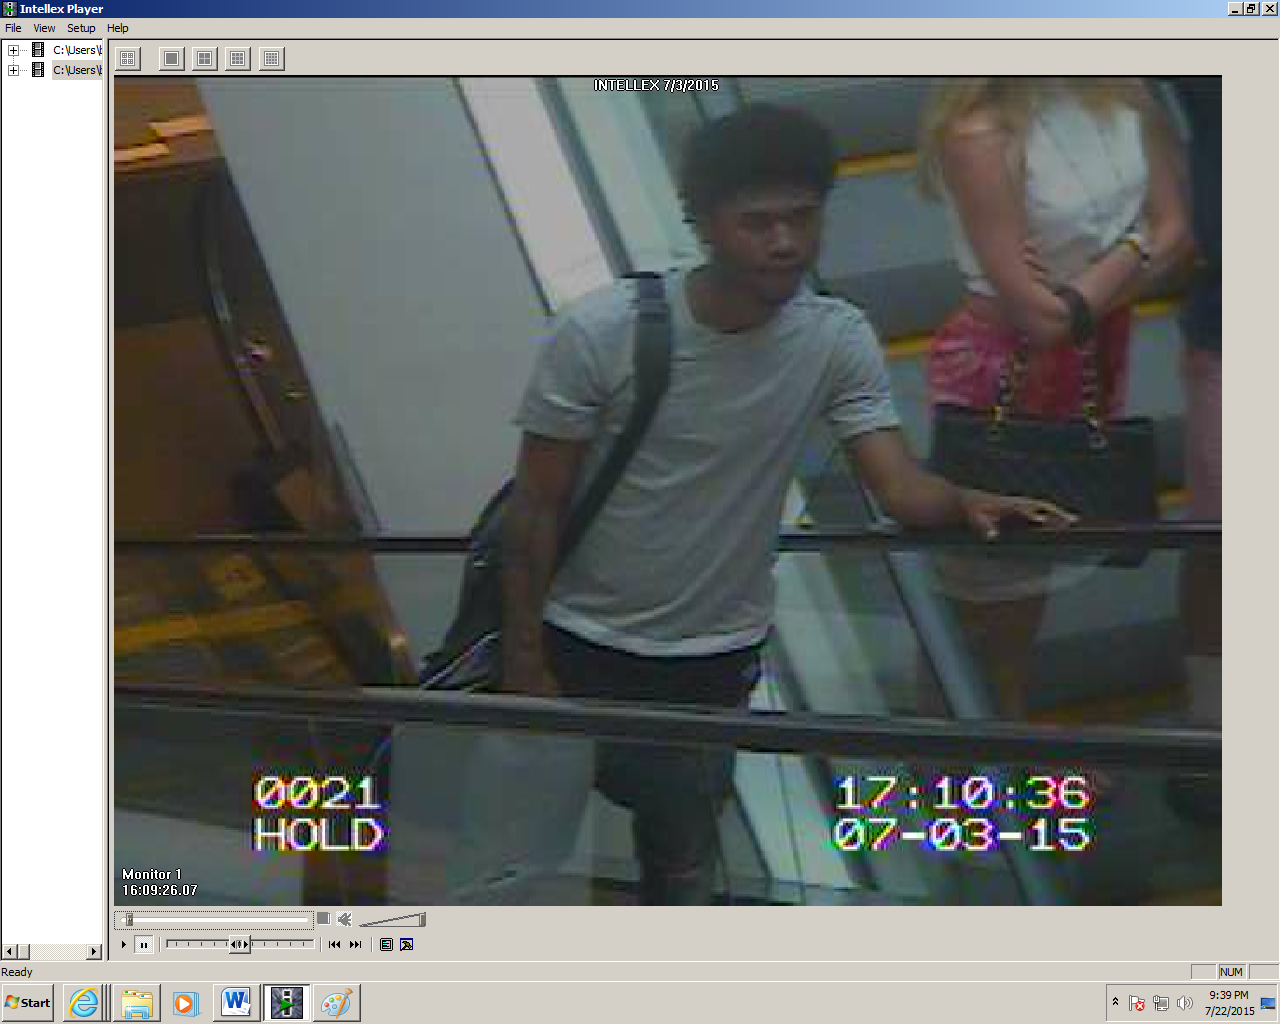 One of the male suspects police say was involved in the July 3 robbery at Bloomingdale's. (Courtesy Montgomery County police)